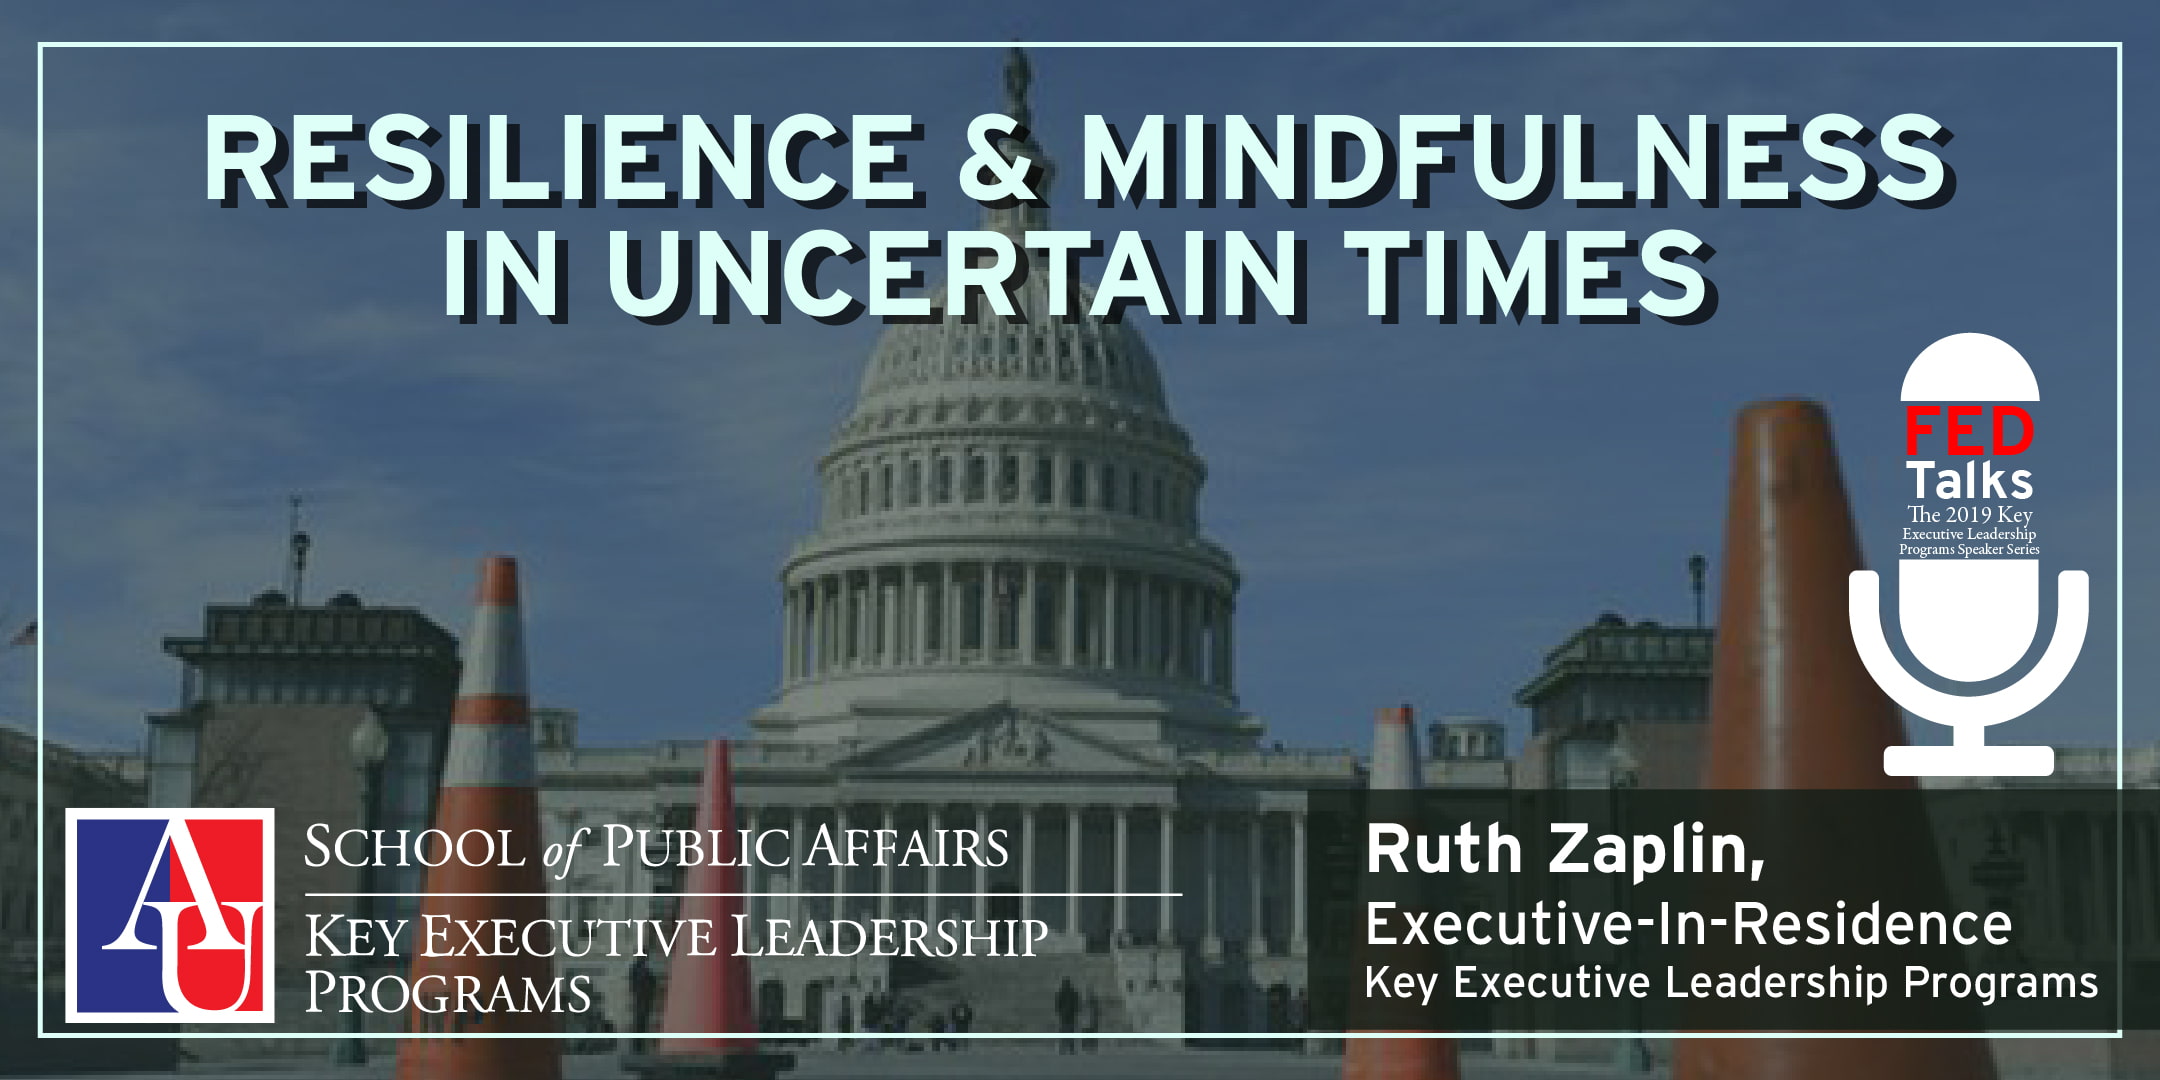 Resilience and Mindfulness in Uncertain Times with Dr. Ruth Zaplin from Feb. 2019